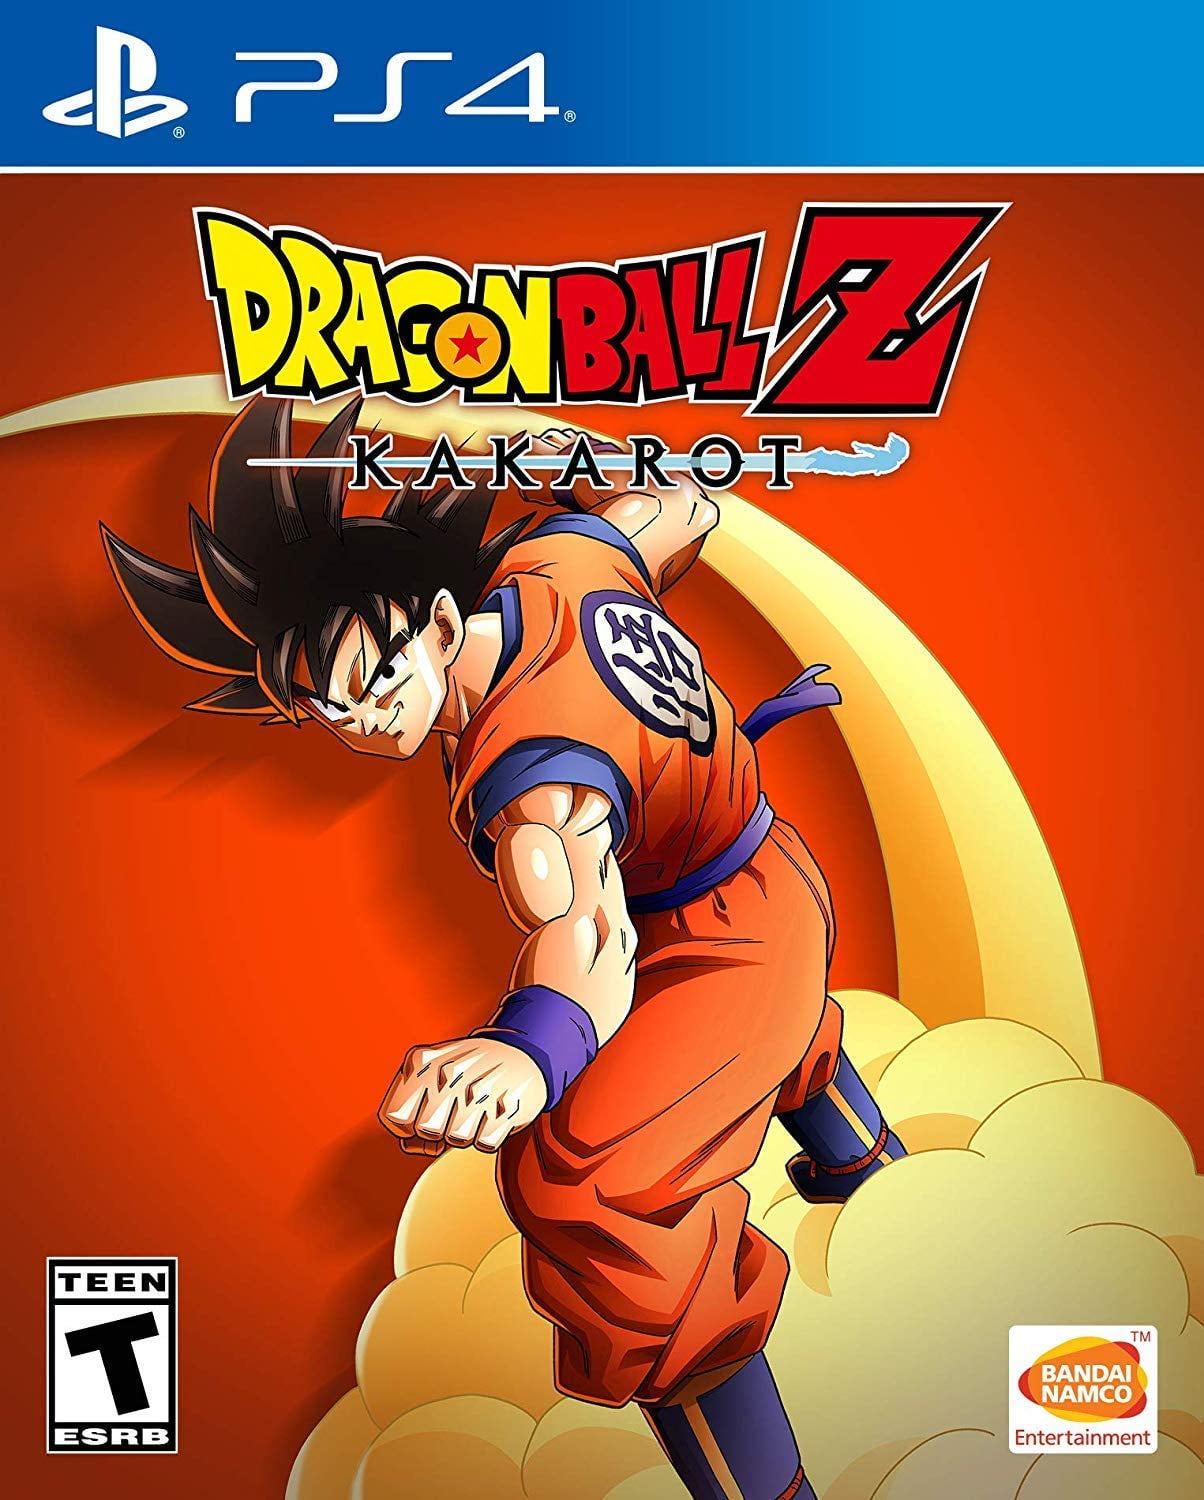 12 Free Best DRAGON BALL Game Android iOS High Graphic (NO